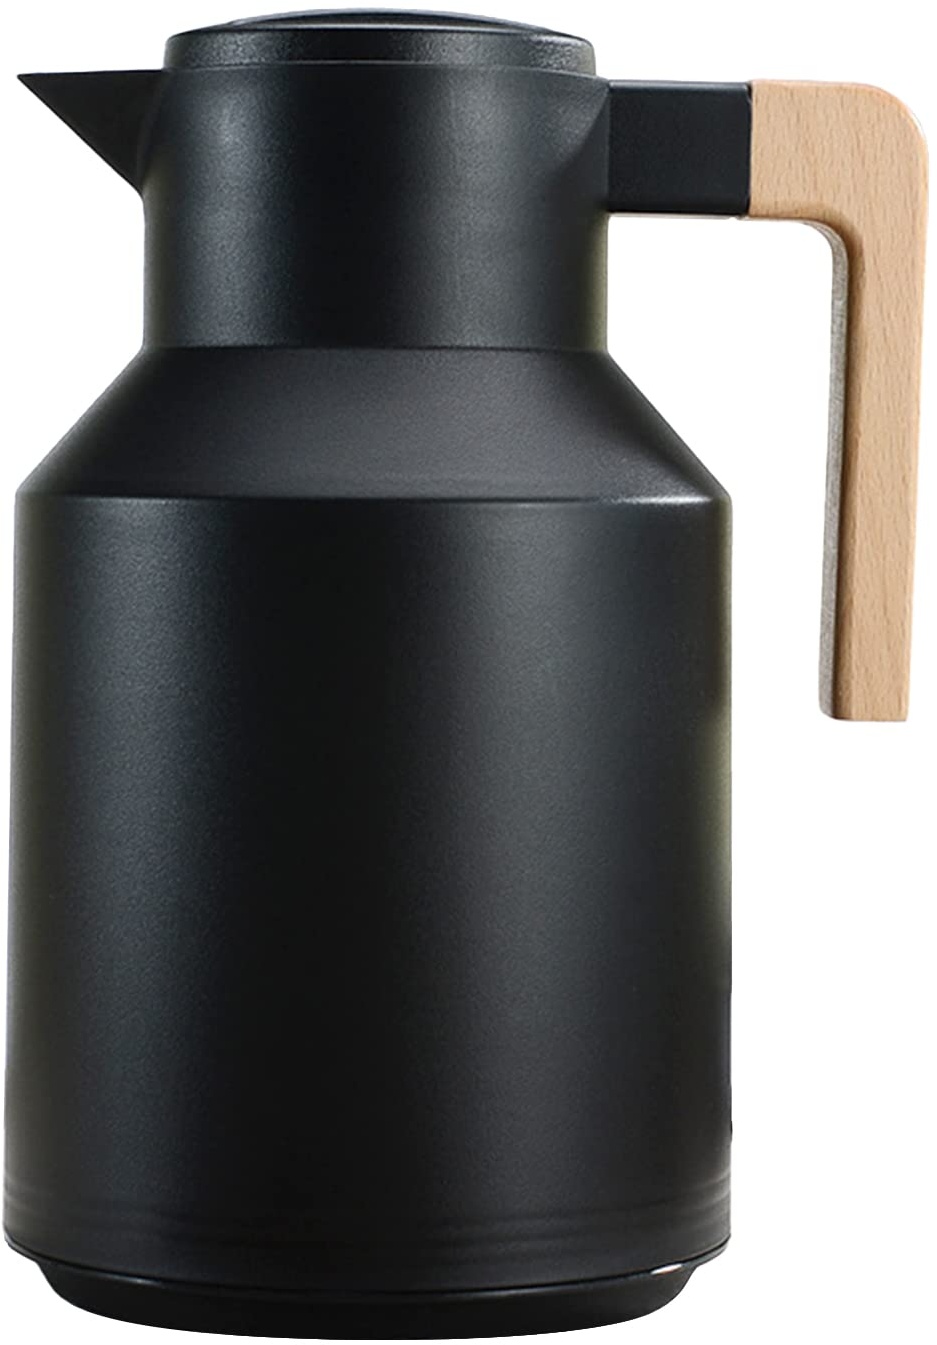 thermos 1l